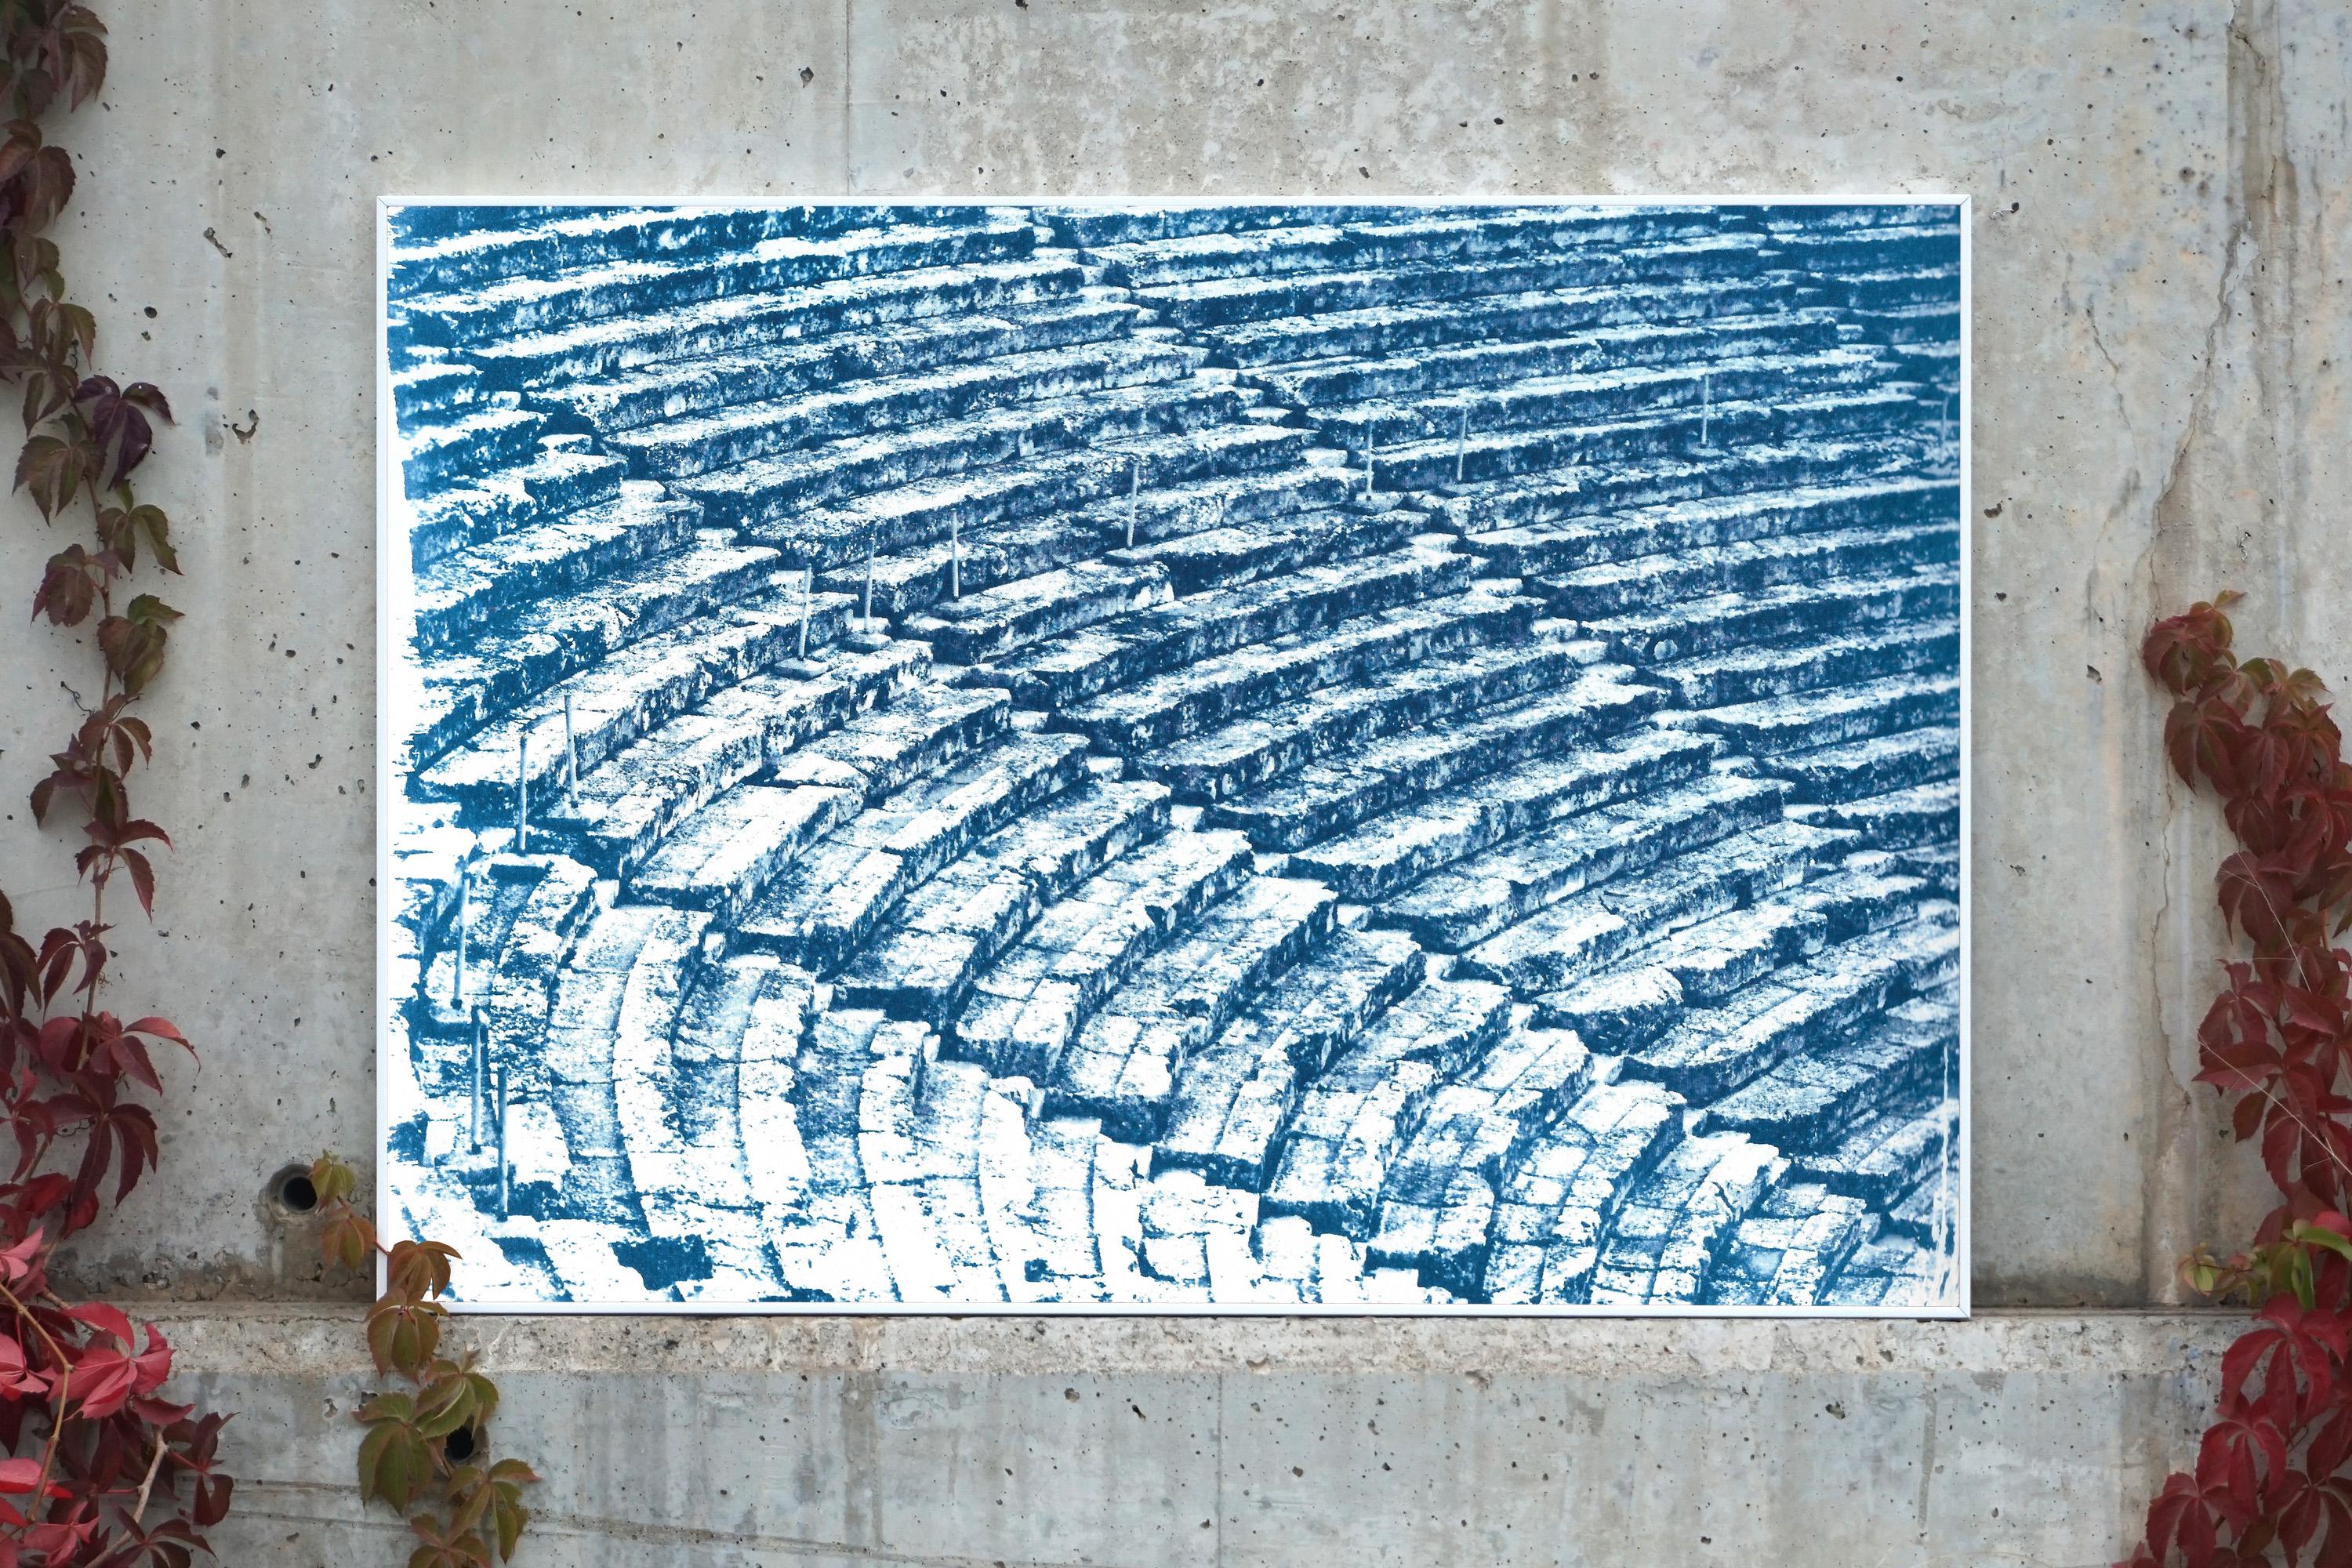 Diptych of Ancient Theatres, Blue Tones Cyanotype, Greek and Roman Architecture - Realist Photograph by Kind of Cyan